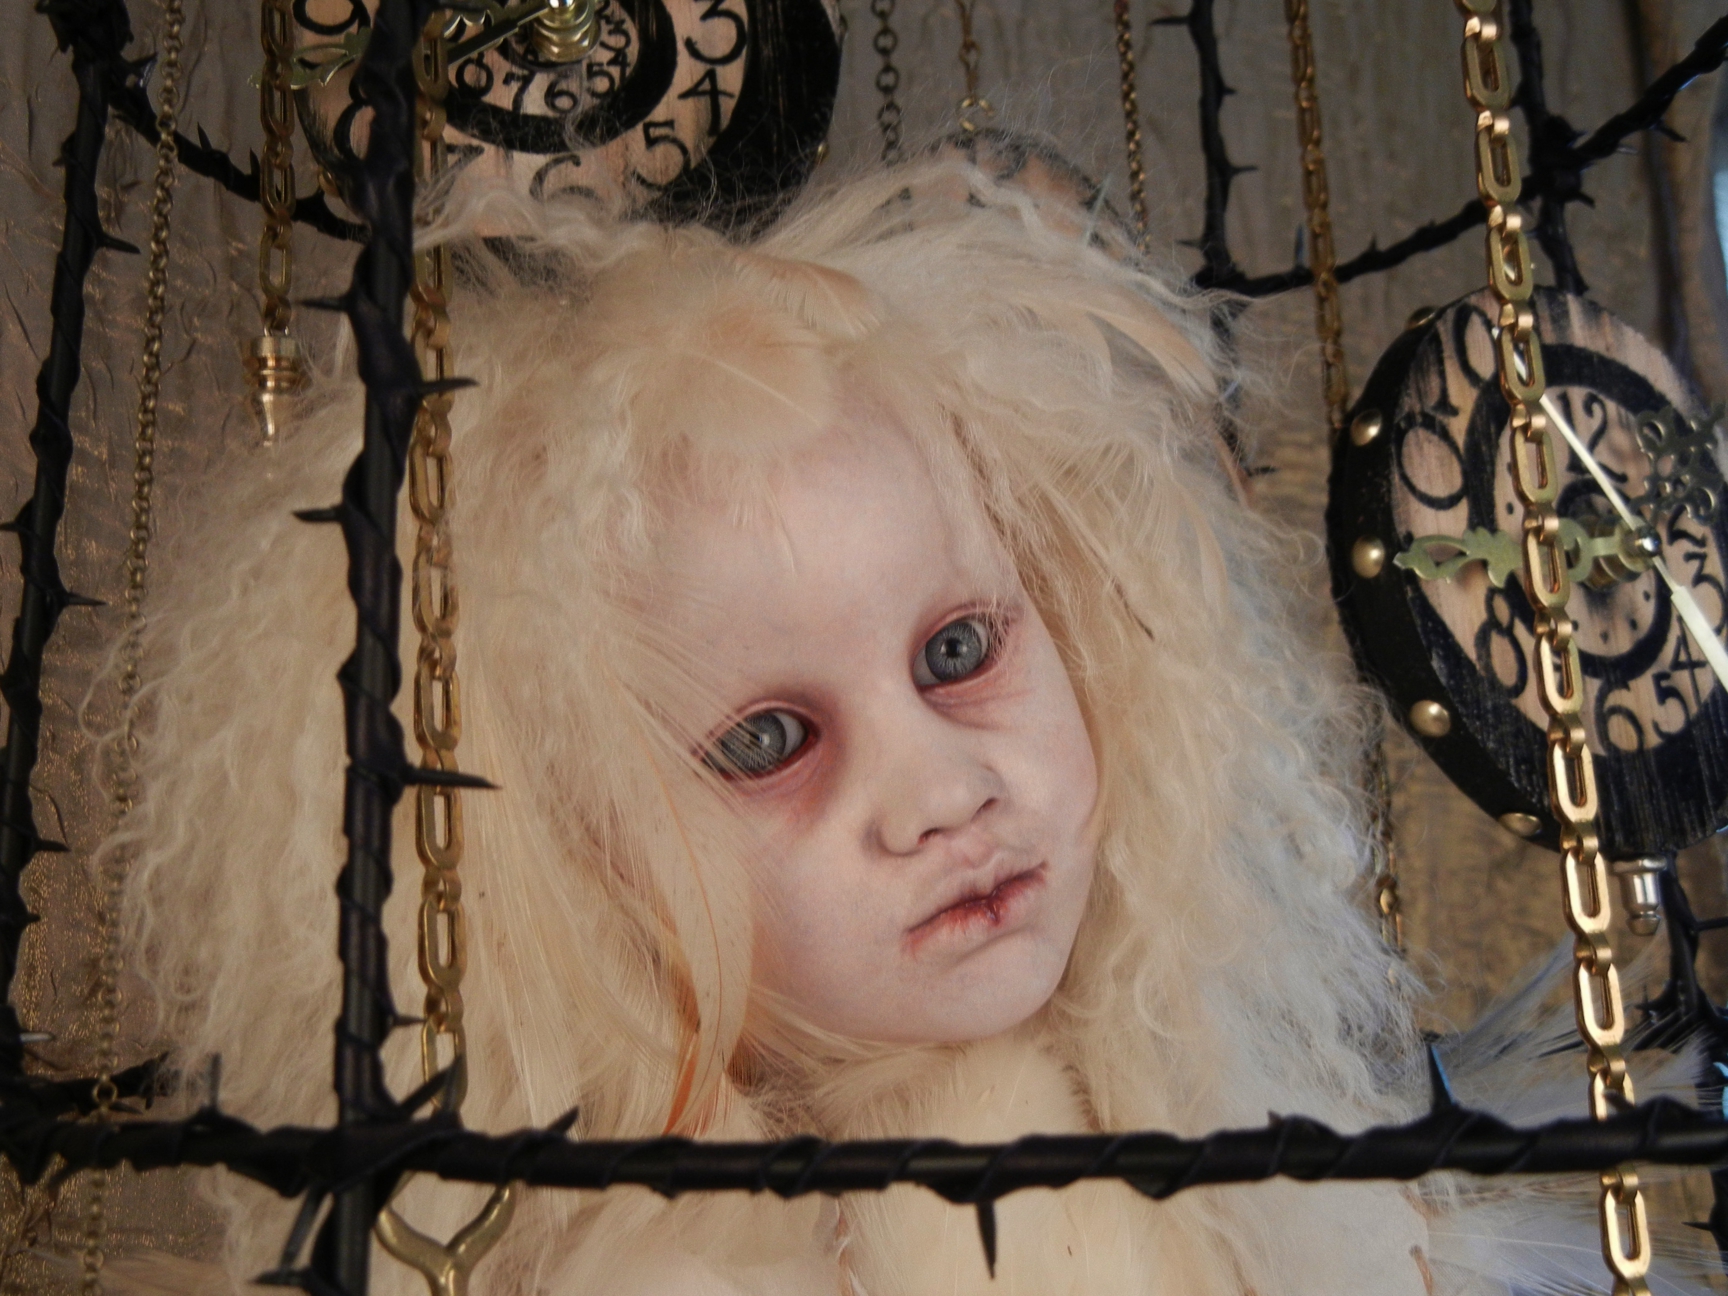 close-up of taxidermy artdoll assemblage of a white thornbird doll sitting in a suspended cage surrounded by hand painted clocks and hanging gold keys